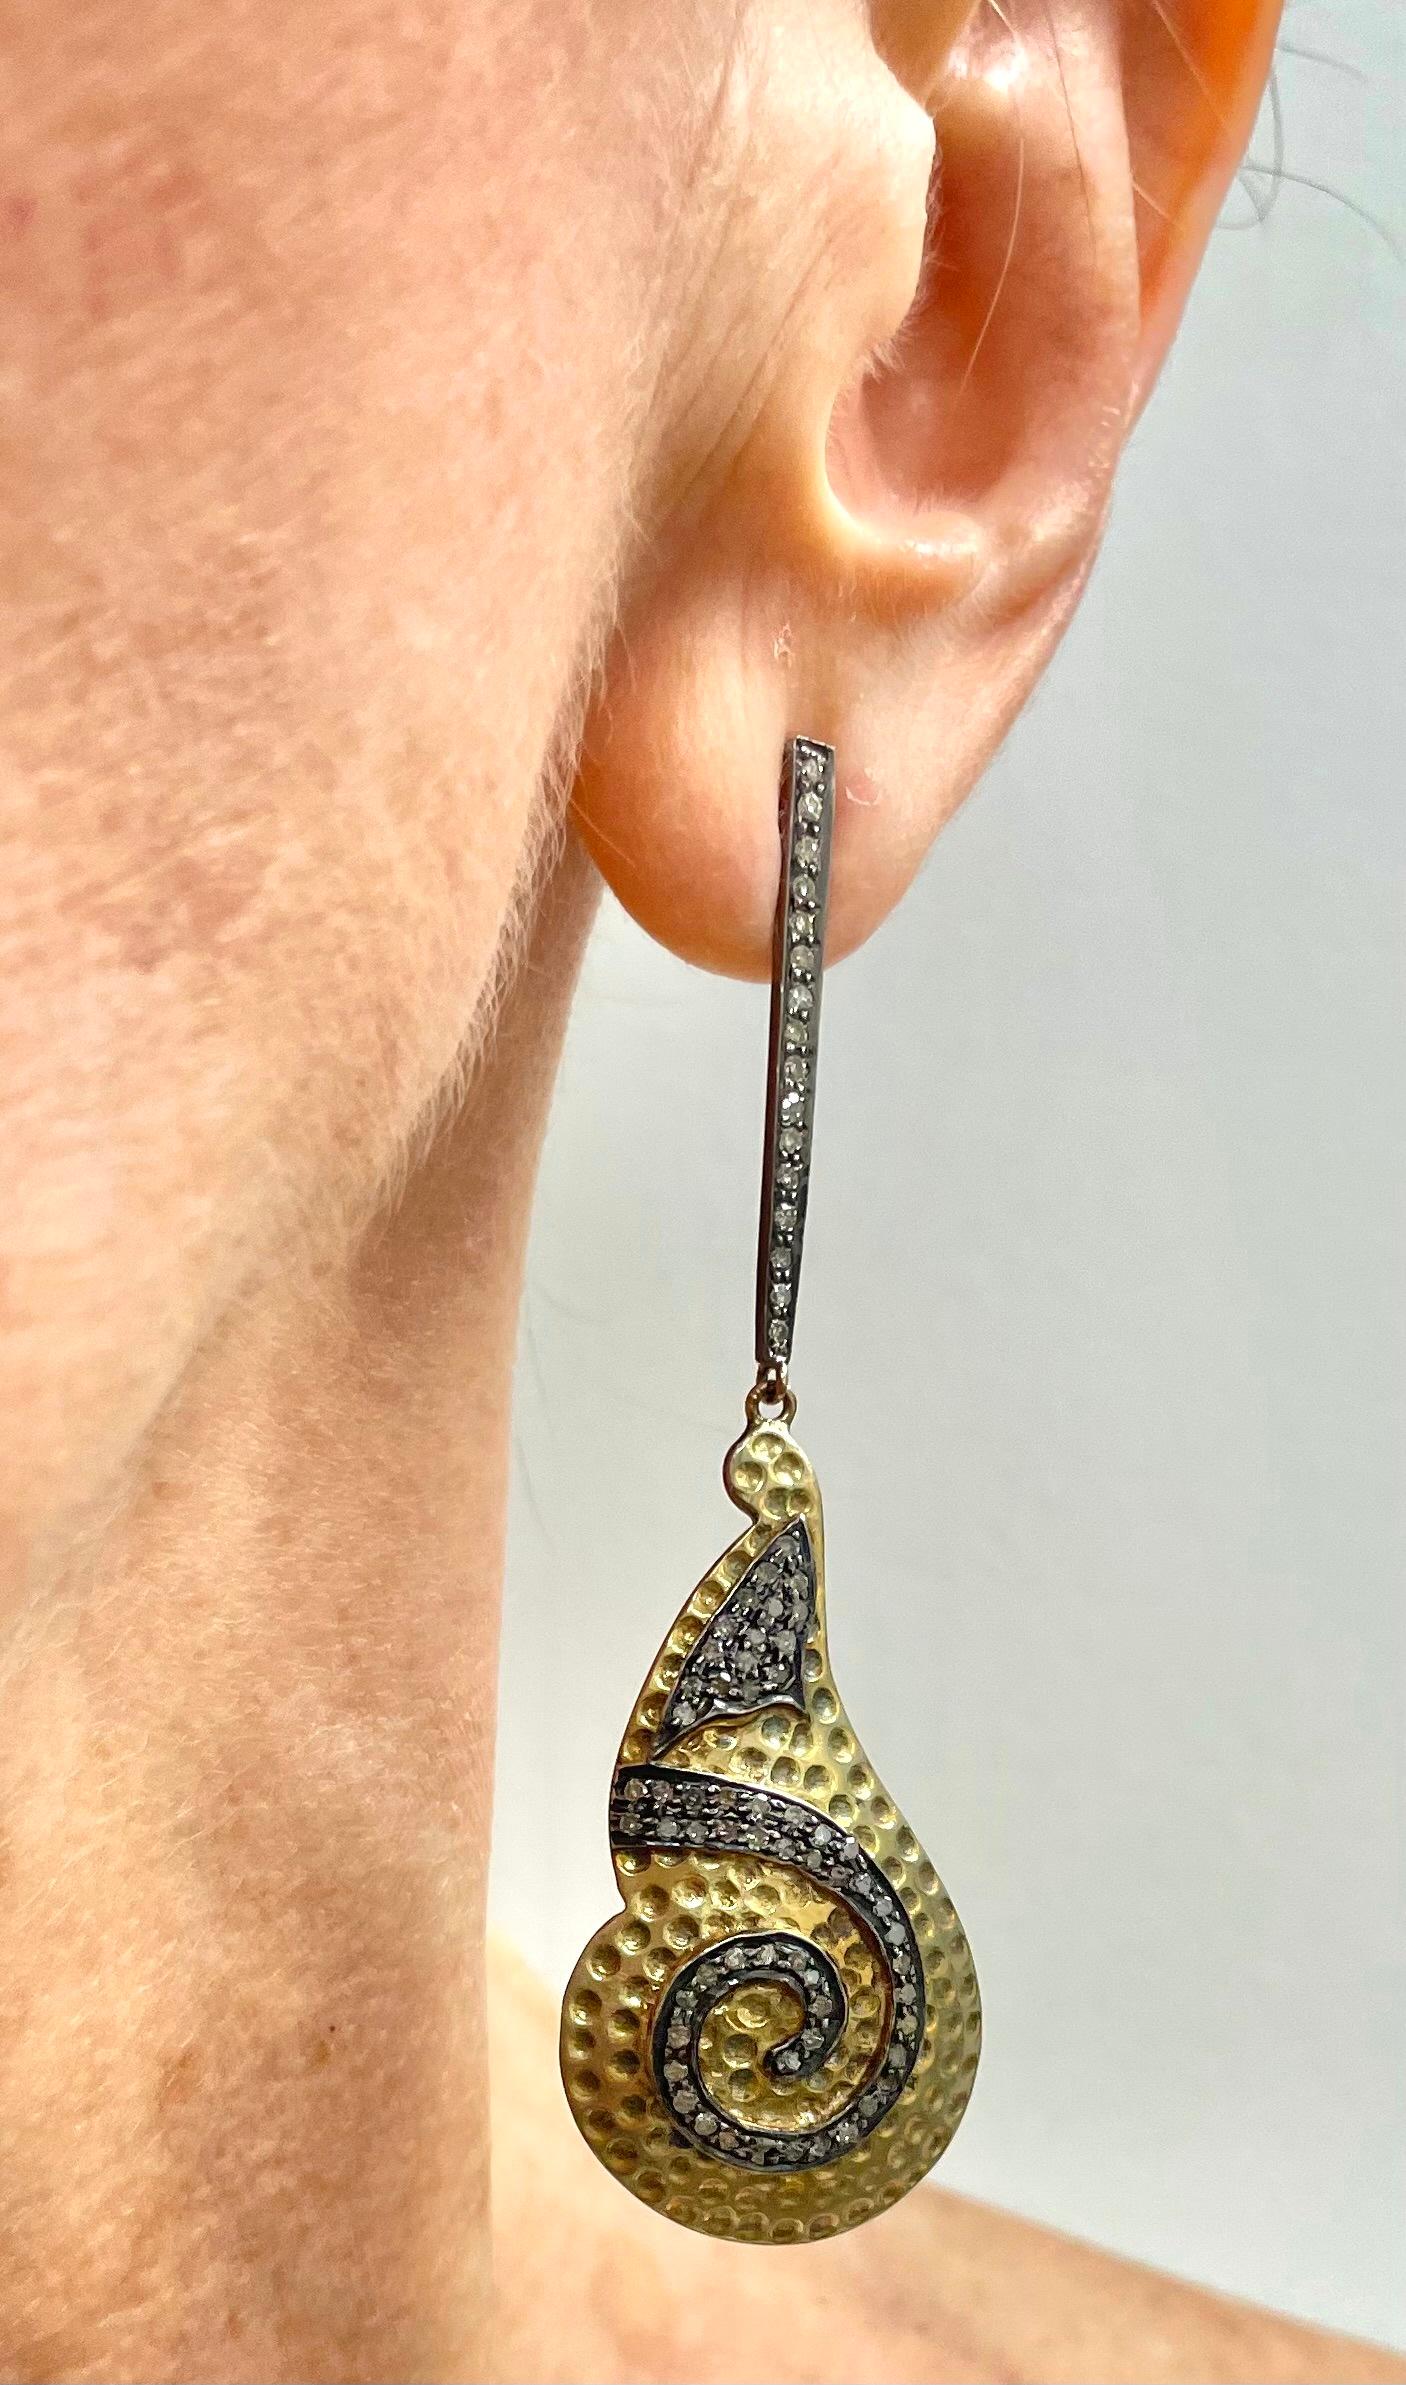 Description
Striking hammered 14k yellow gold vermeil with a swirl of pave diamonds for contrast and style, suspended from a tapered pave diamond bar post.
Item # E3121

Materials and Weight
Vermeil
Pave diamonds 1.90cts
Rhodium sterling silver
14k